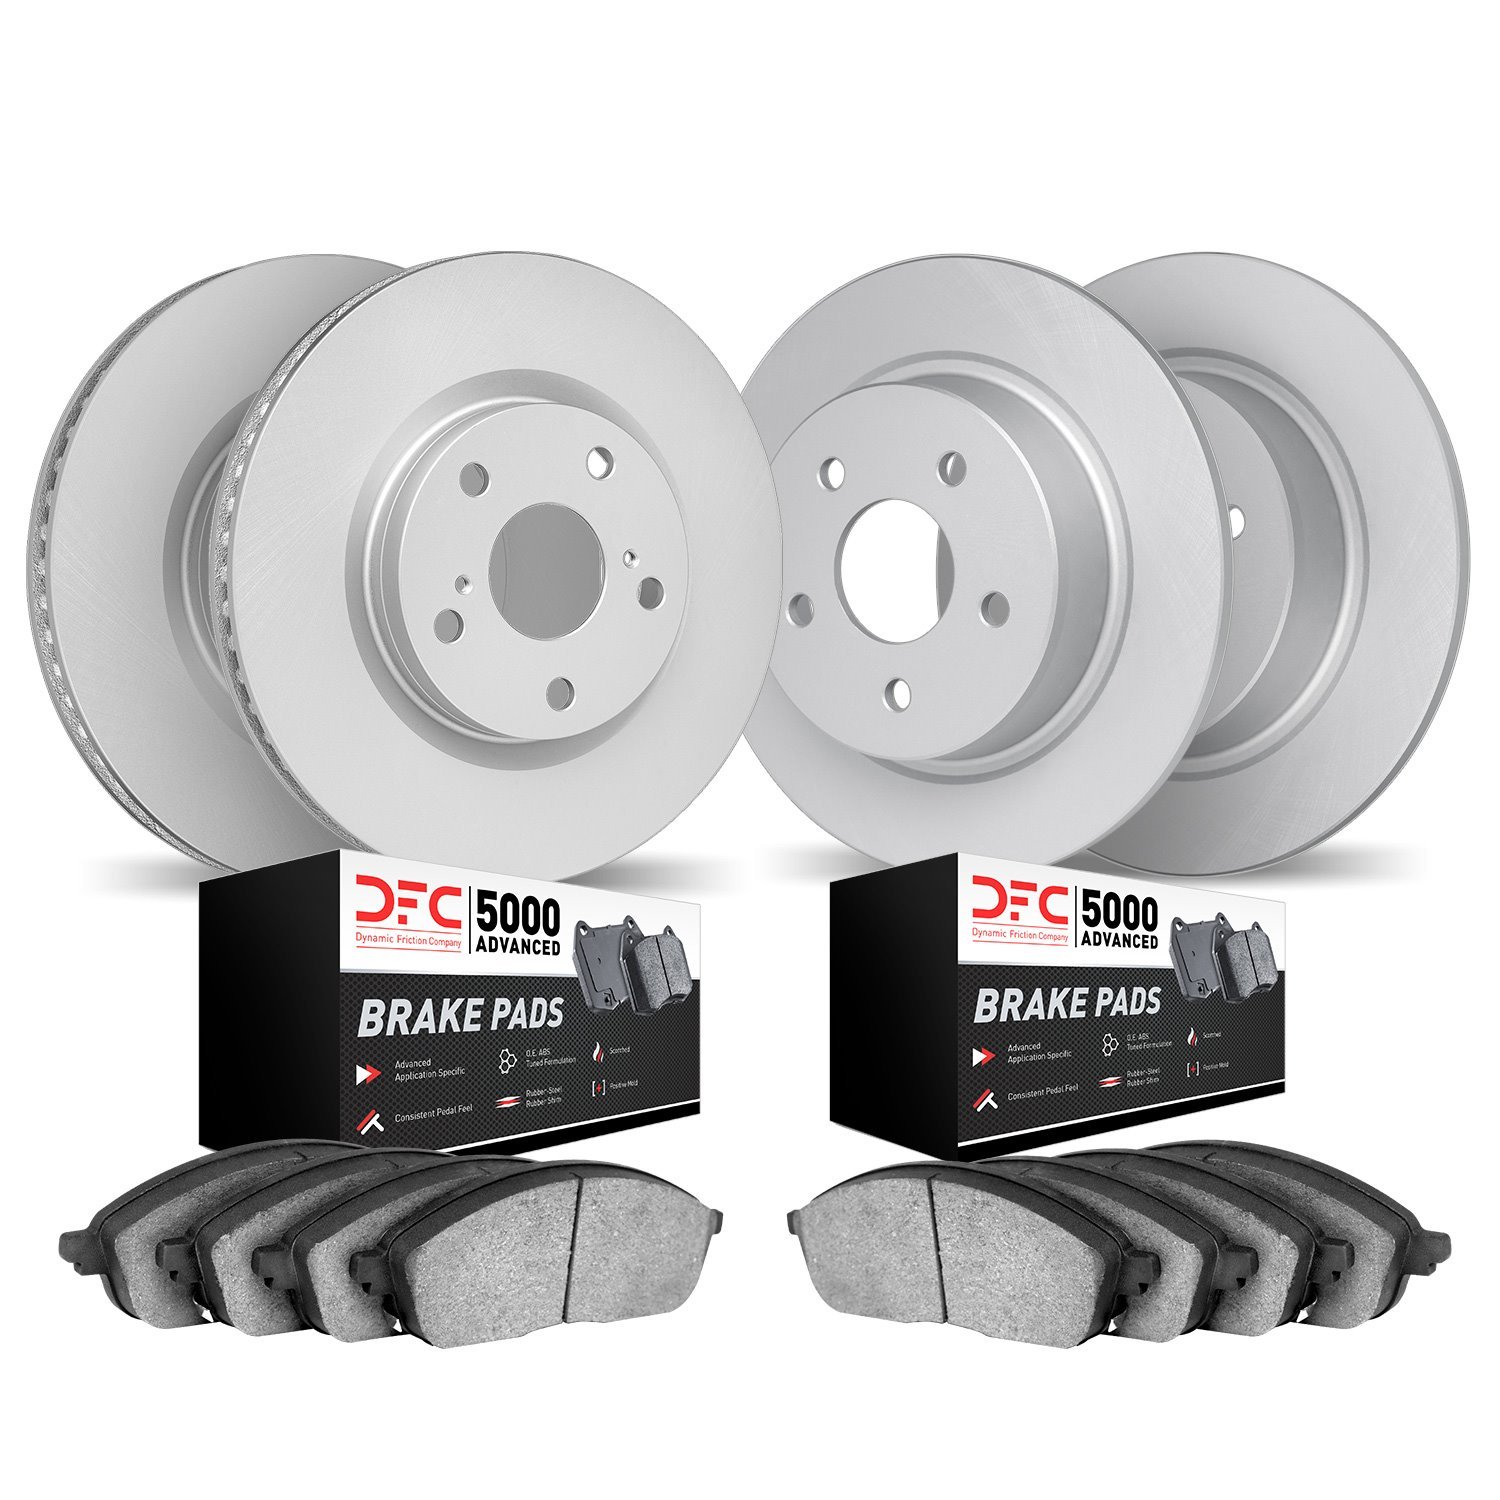 4504-76106 Geospec Brake Rotors w/5000 Advanced Brake Pads Kit, Fits Select Lexus/Toyota/Scion, Position: Front and Rear